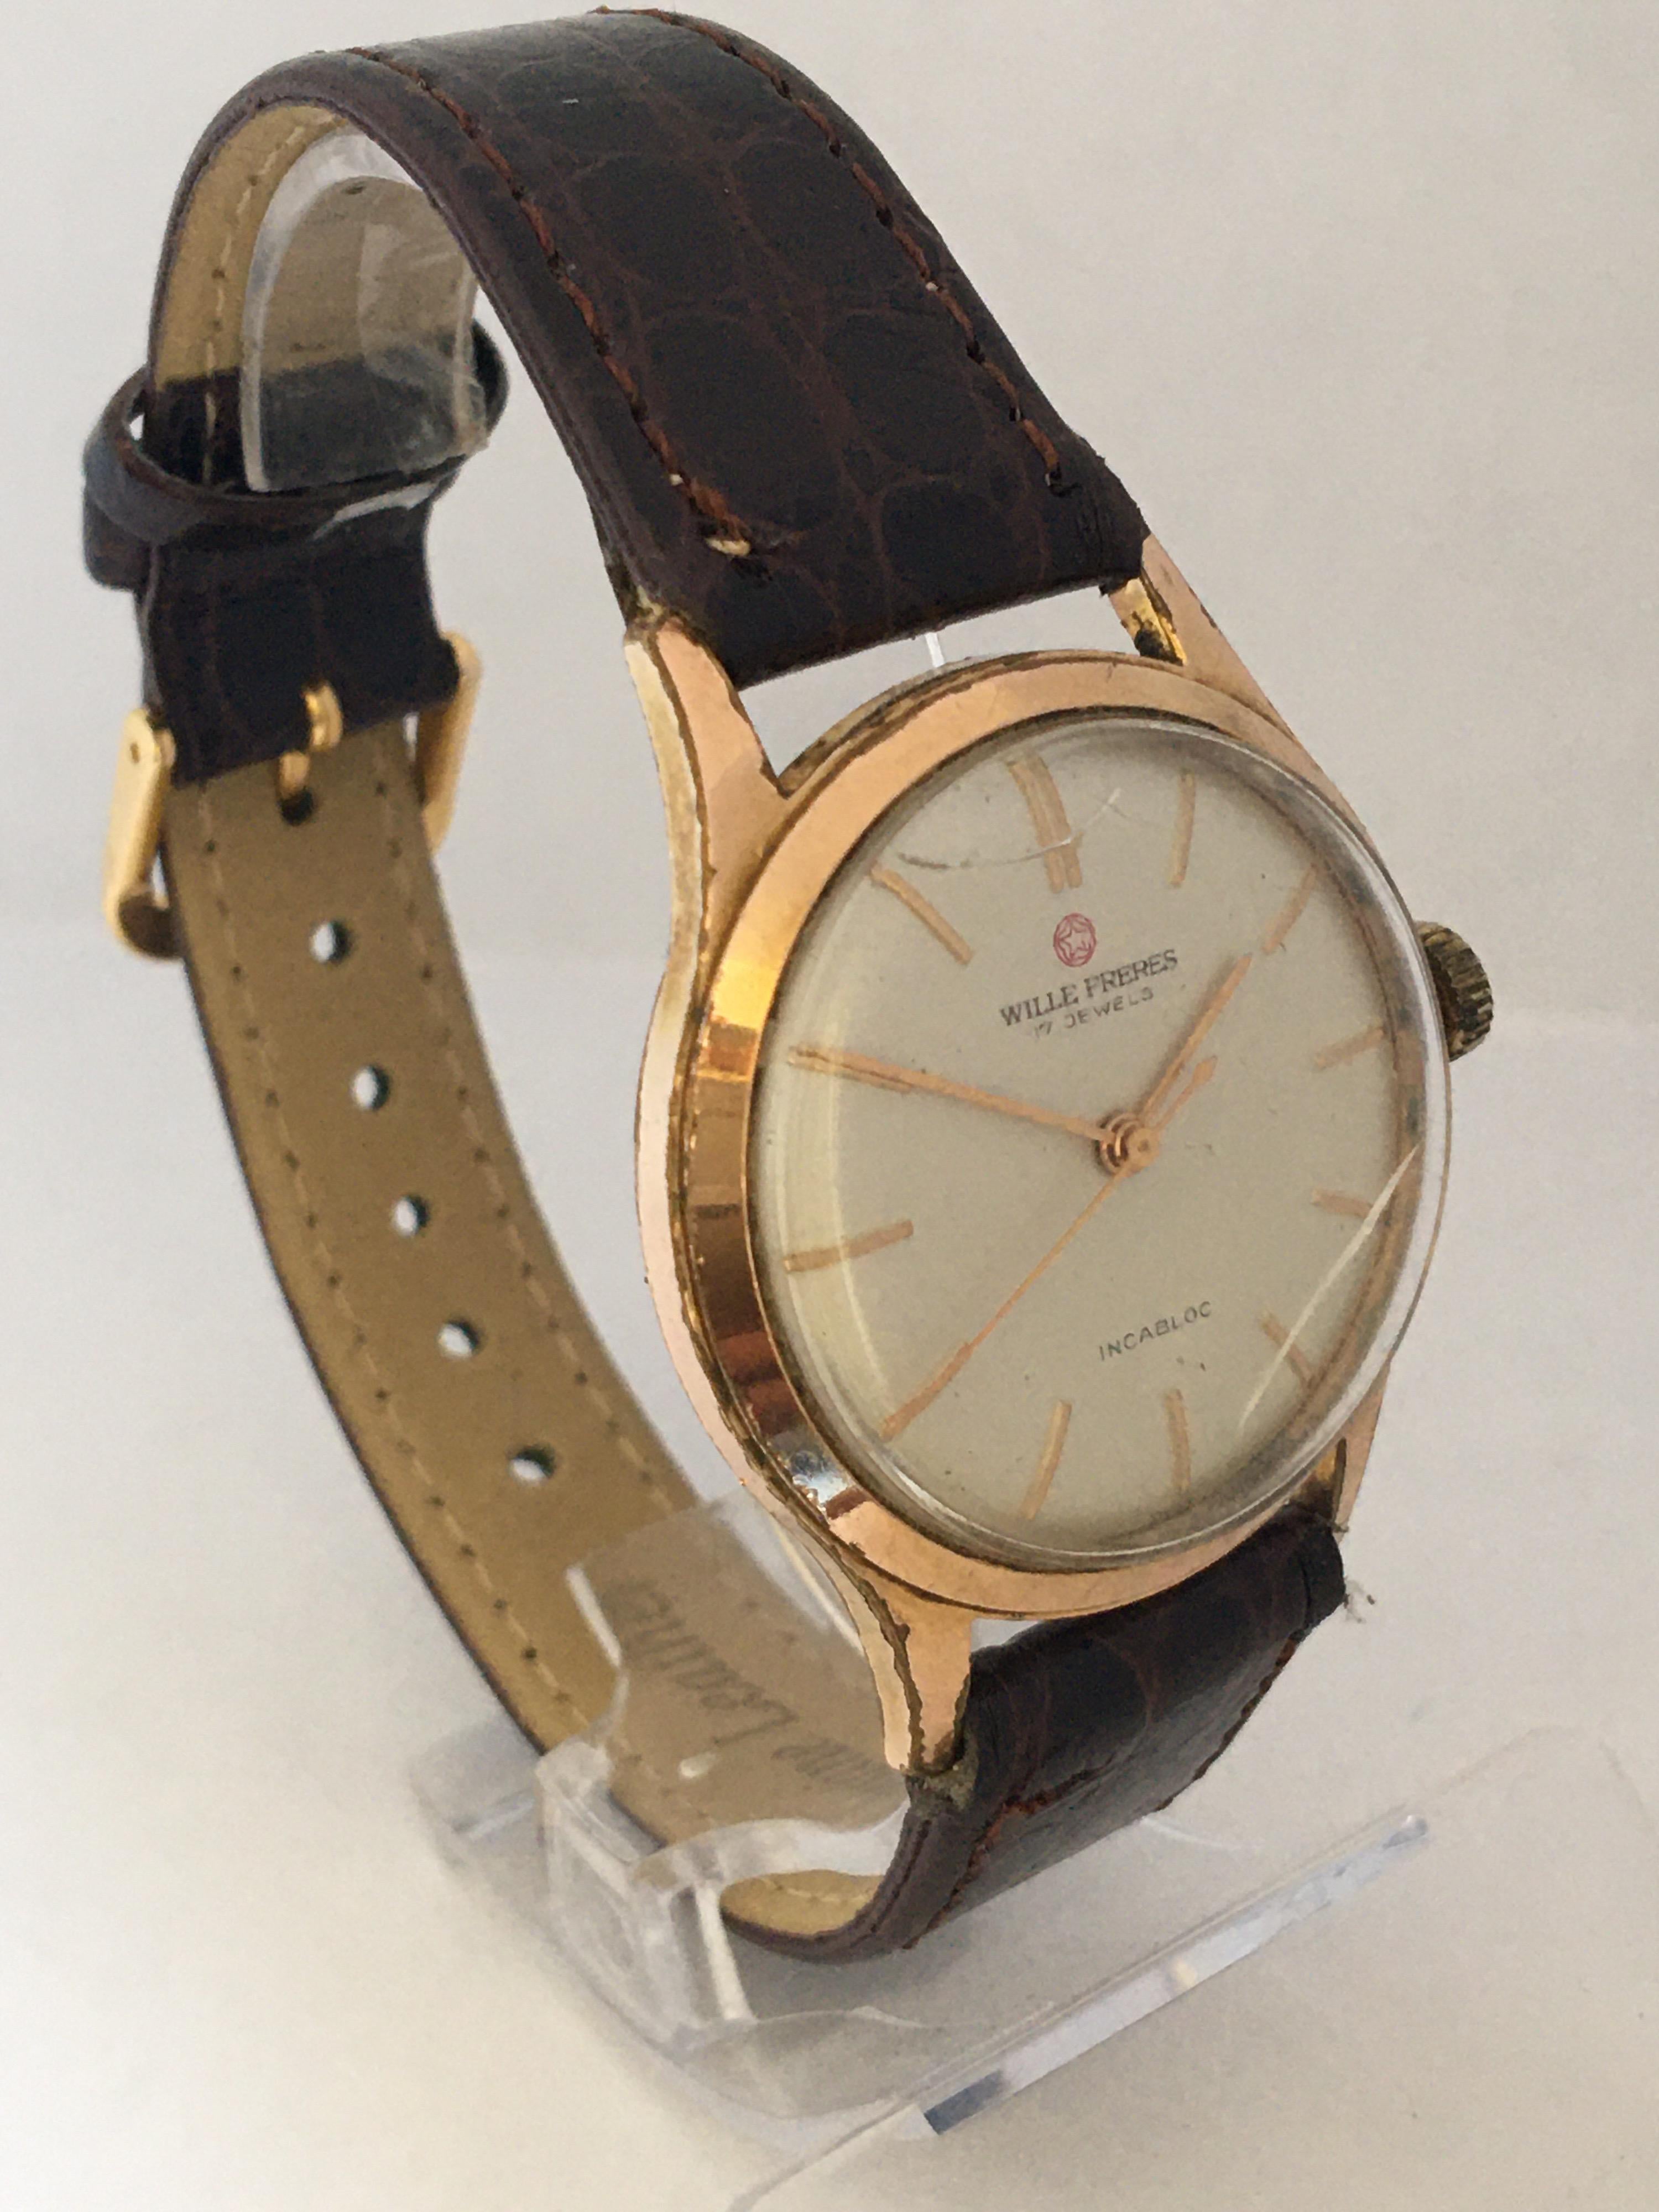 This pre-owned vintage 33mm diameter hand winding Swiss watch is in good working condition and it is running well. Visible signs of ageing and wear with cracks and scratches on the glass as shown. Some tiny scratches on and tarnished on the gold